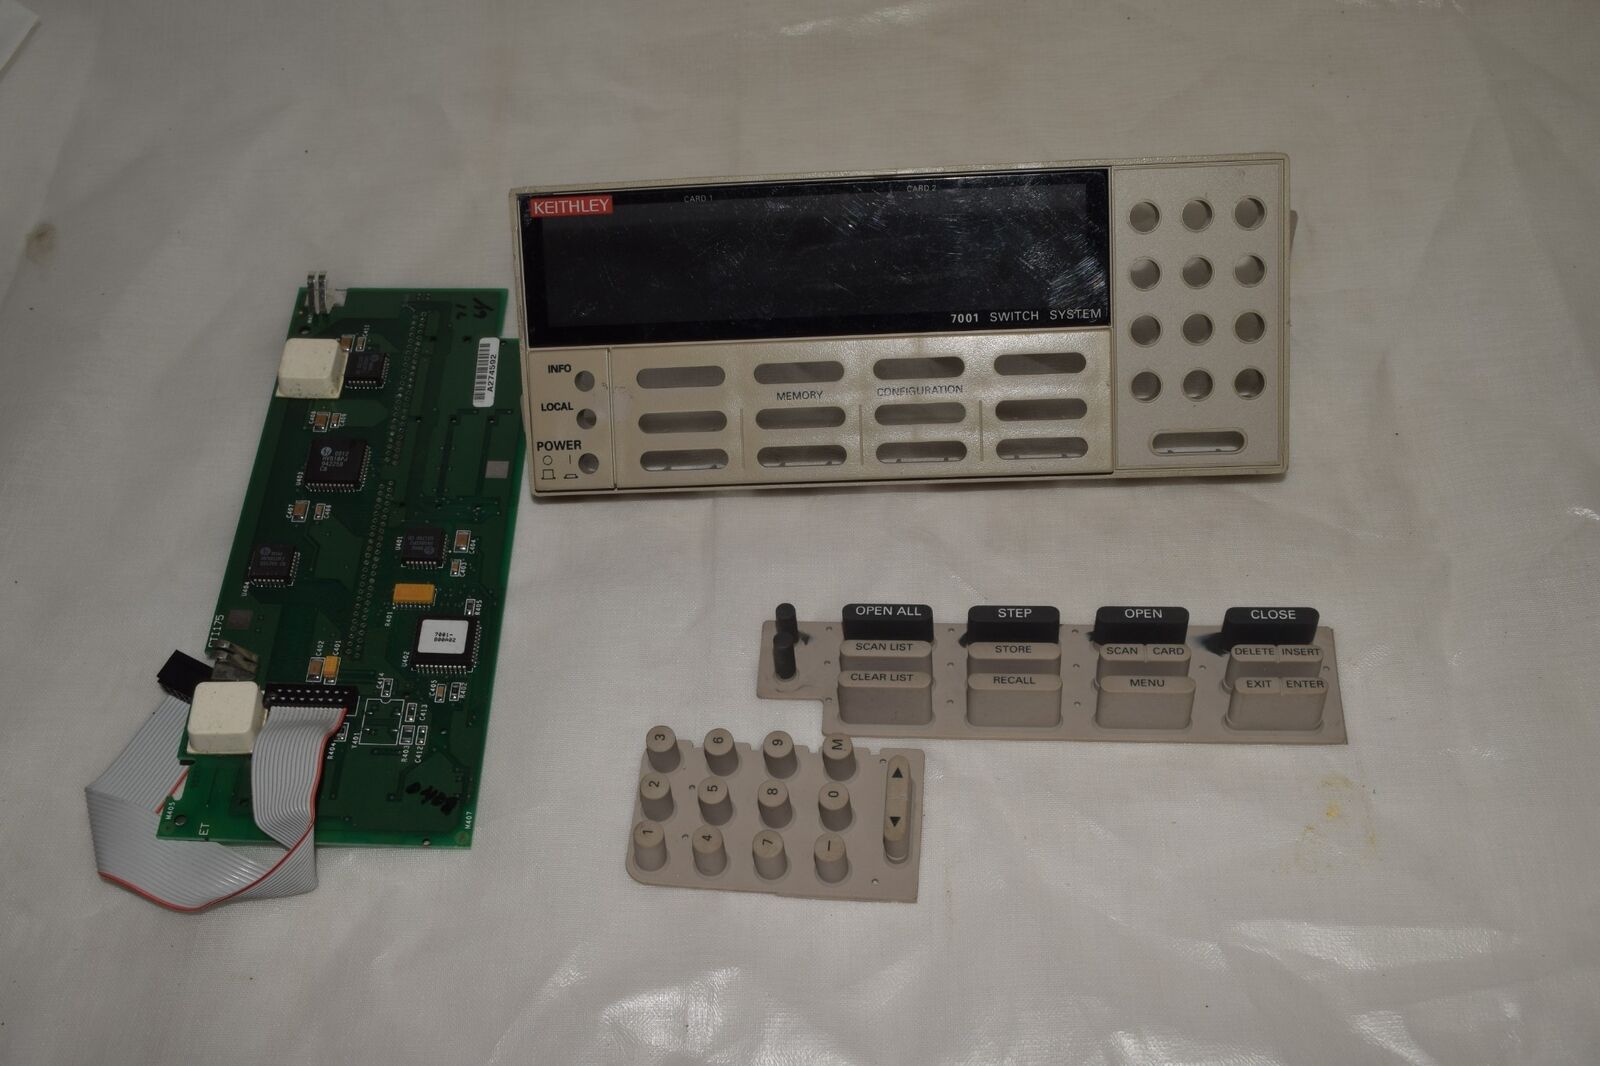 KEITHLEY 7001 SWITCH SYSTEM FRONT COVER ONLY (LGC45)